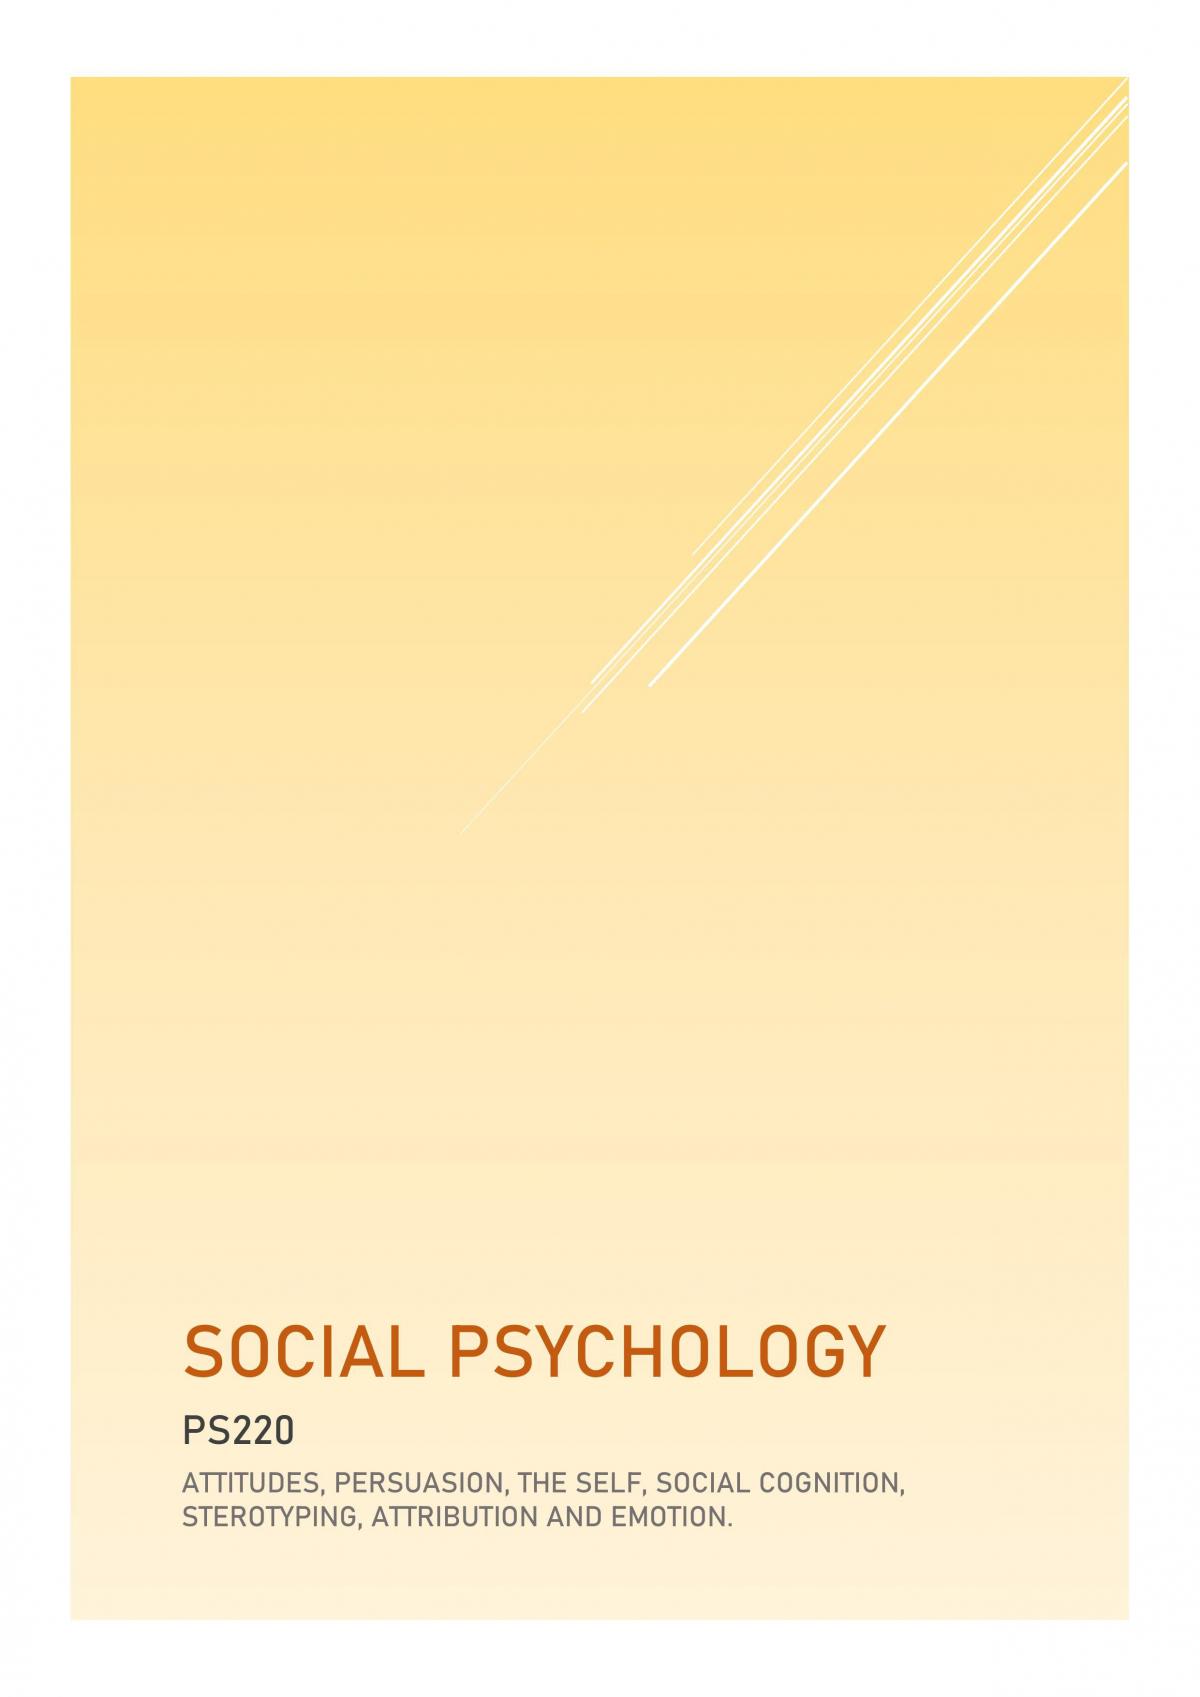 Social Psychology Course Notes - PS220 - Page 1